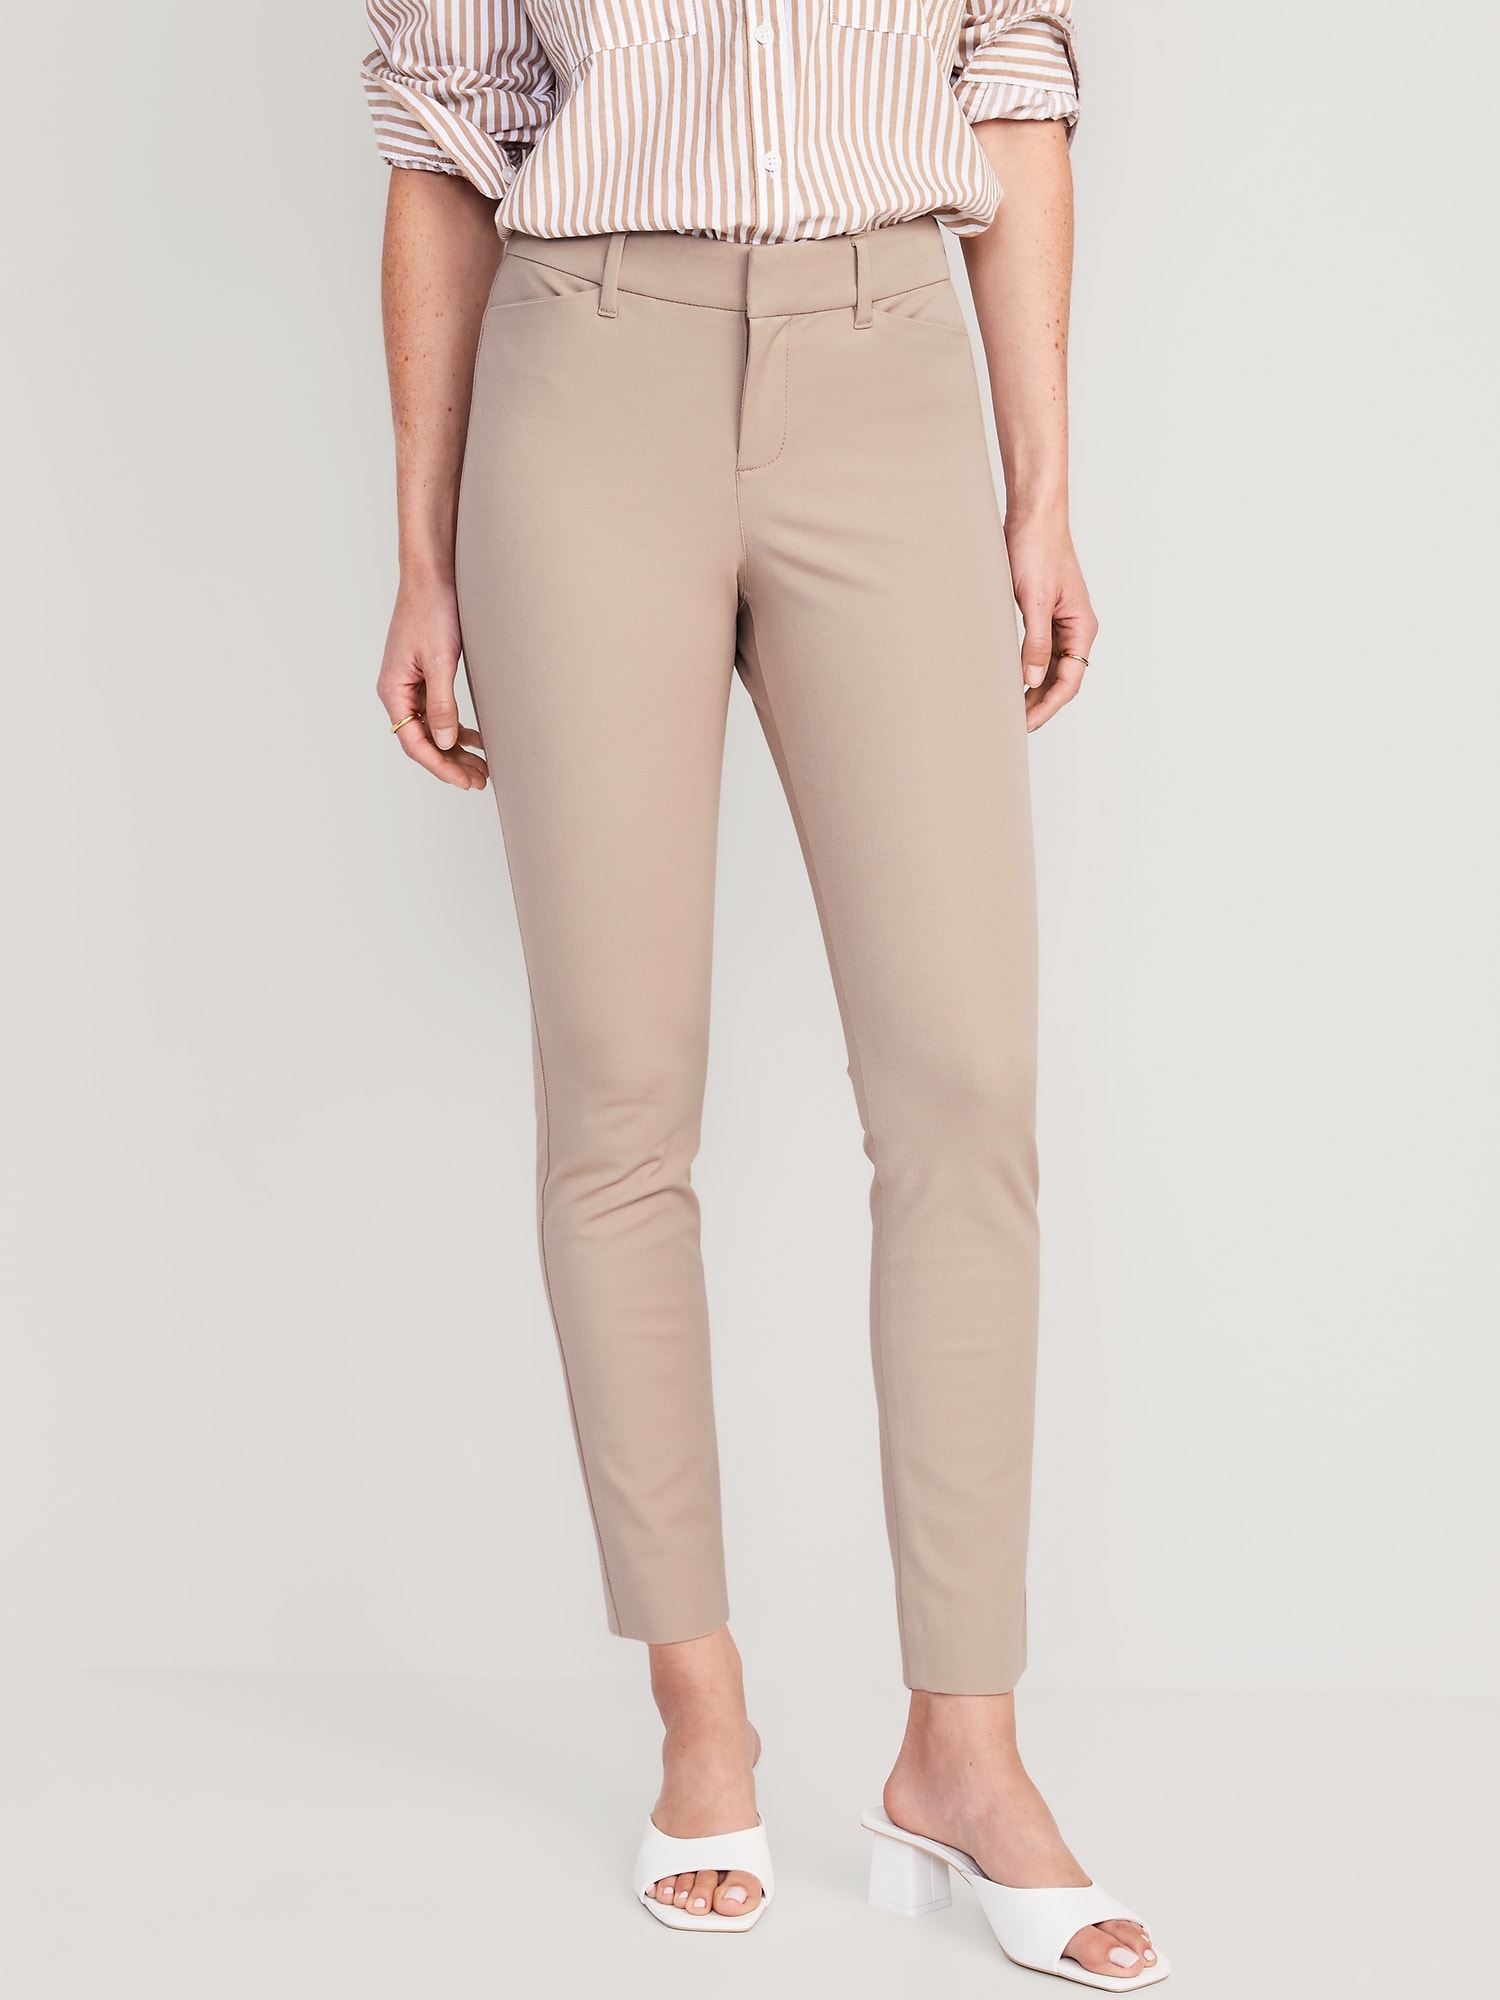 Mid-Rise Pixie Skinny Ankle Pants Hot Deal